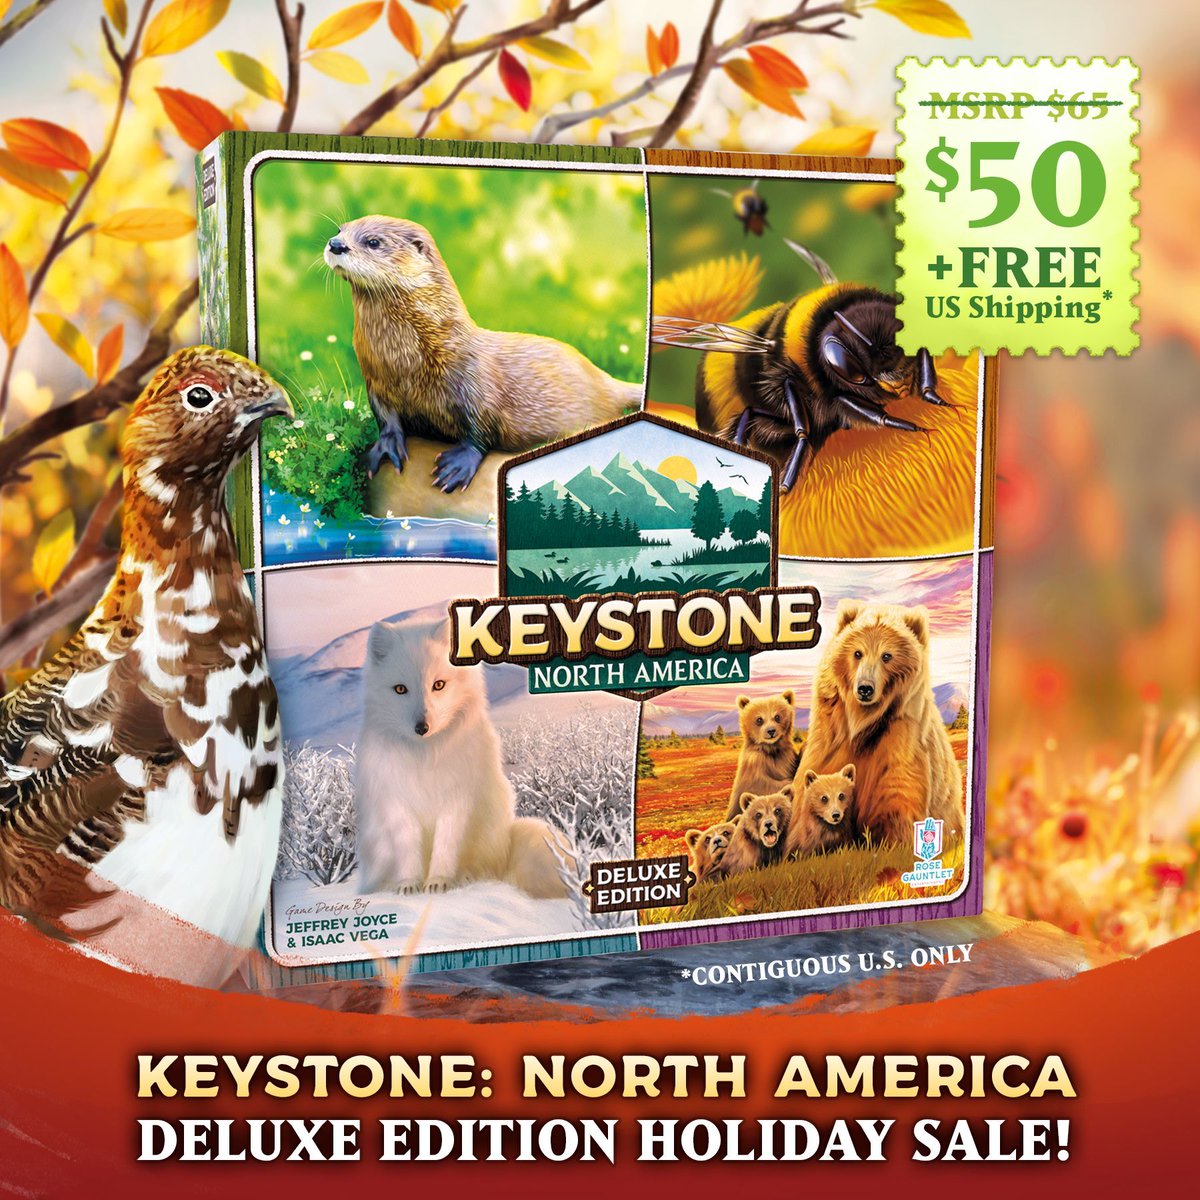 Our #HolidaySale is happening now! Get your copy of #KeystoneNorthAmerica Deluxe Edition at our lowest price of the year + FREE shipping: rosegauntlet.com/collections/all #boardgamesale #naturegames #strategygames #blackfridaysale